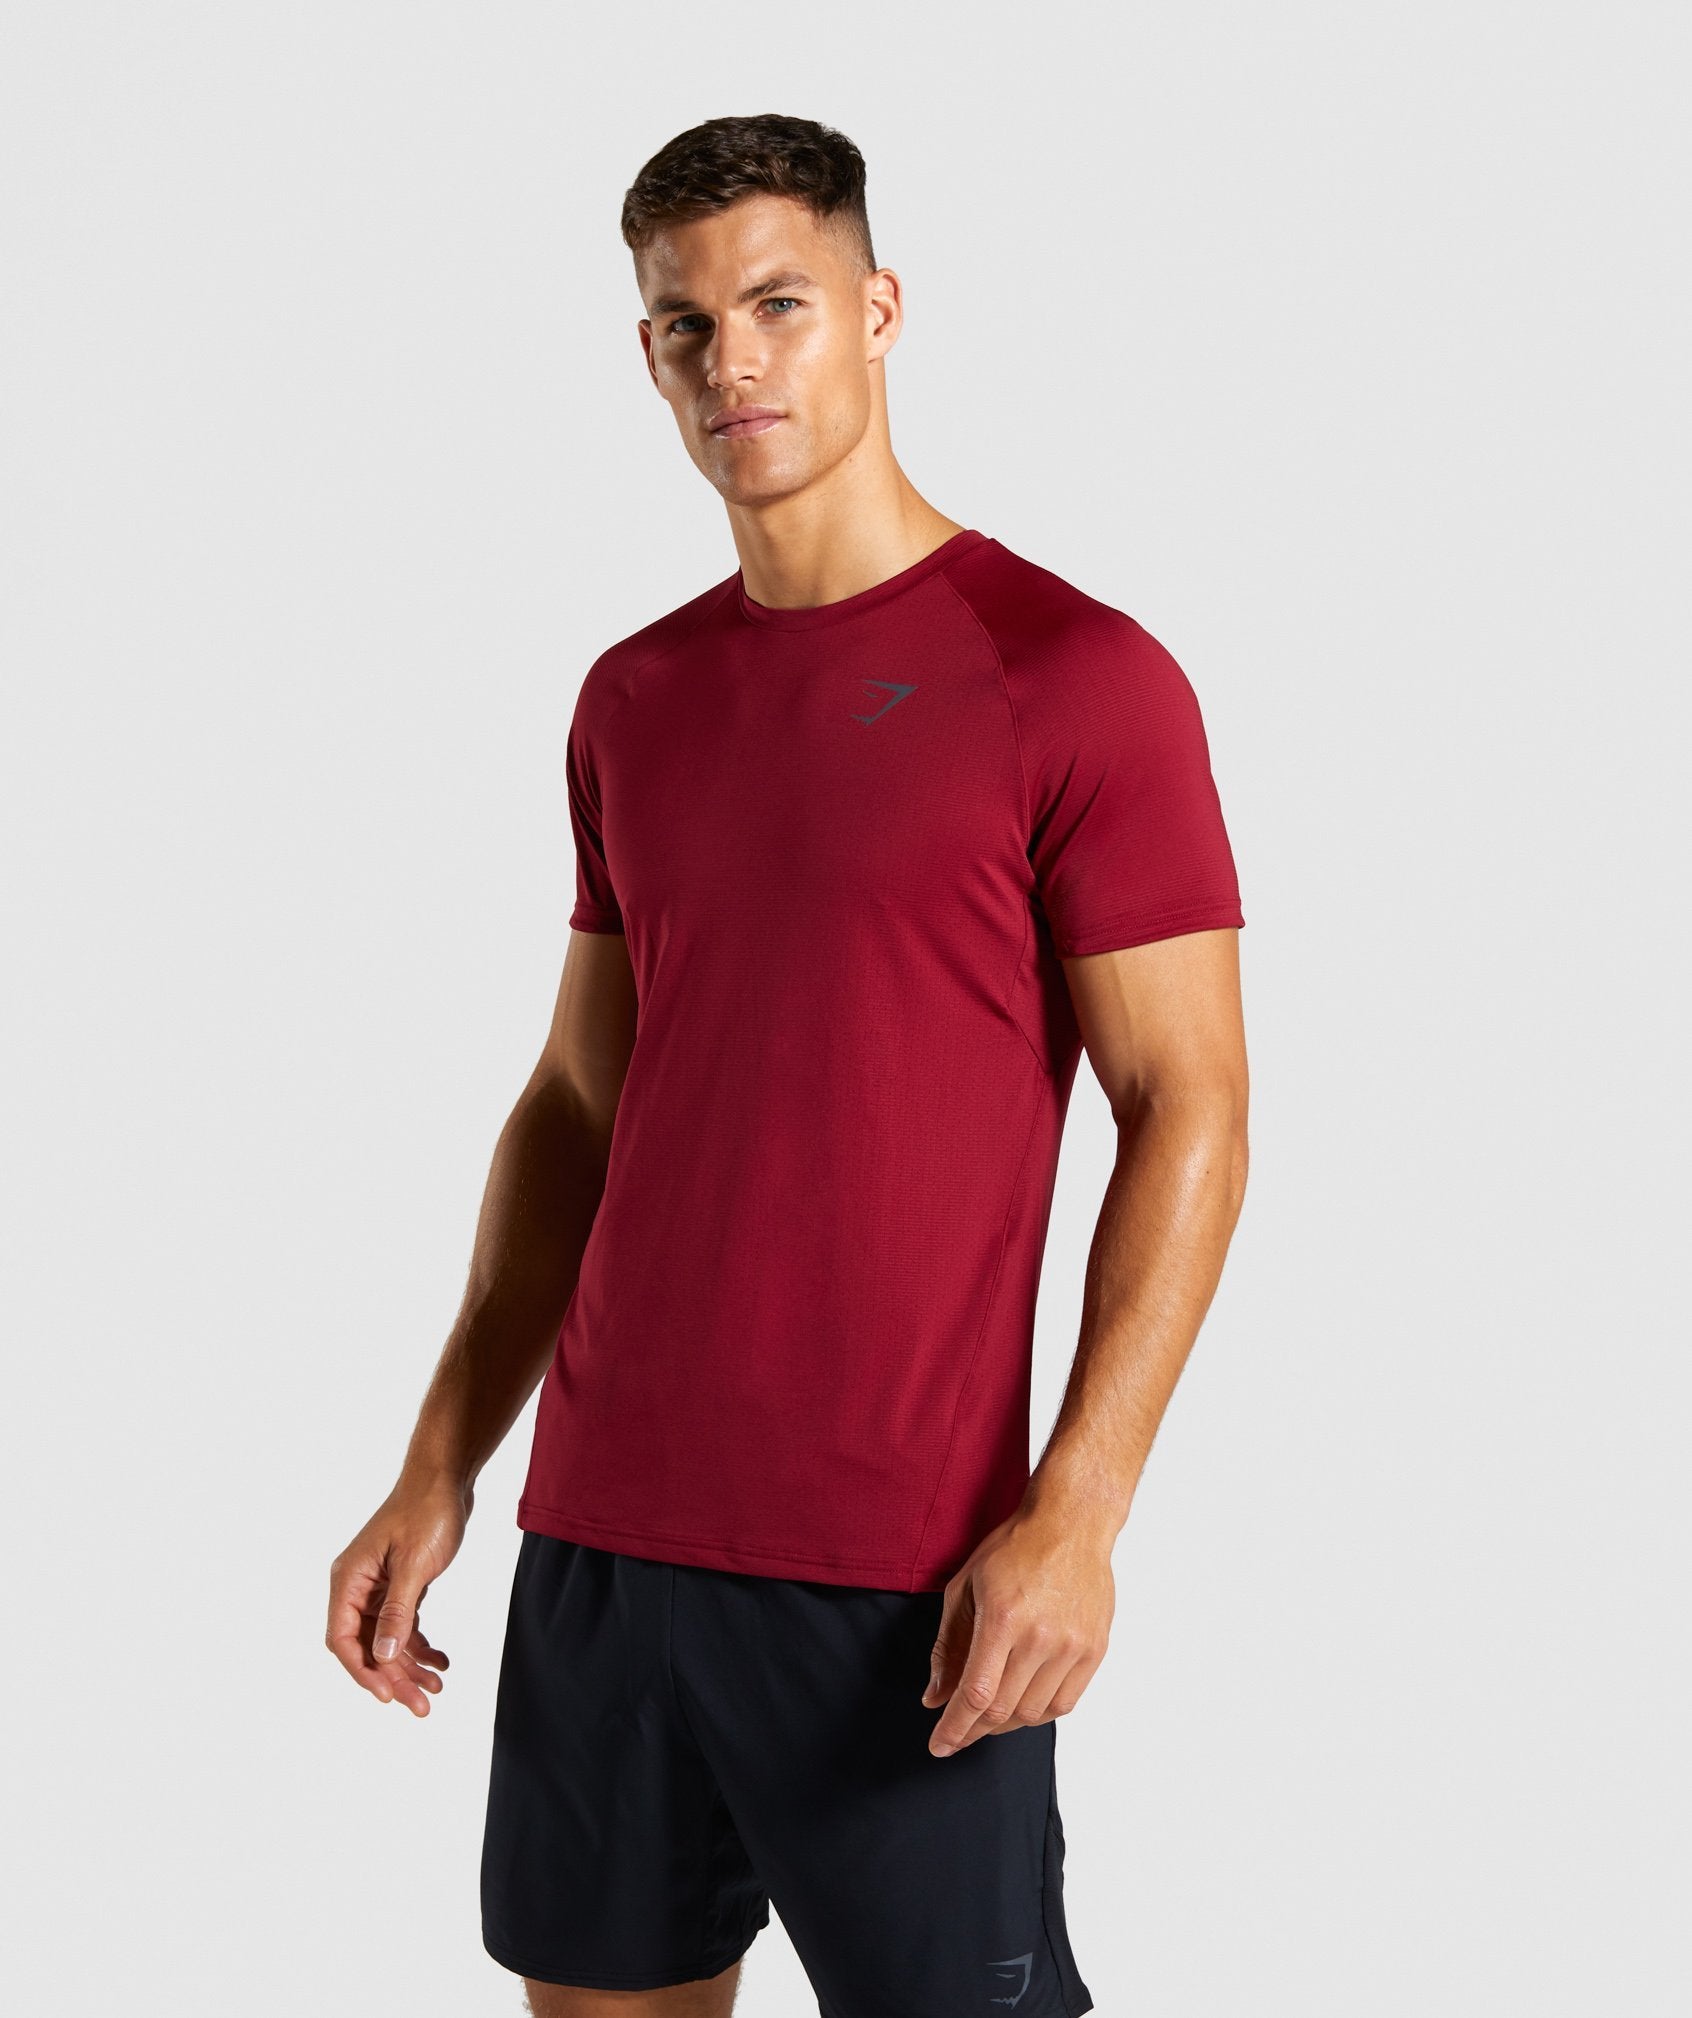 Contemporary T-Shirt in Claret - view 1